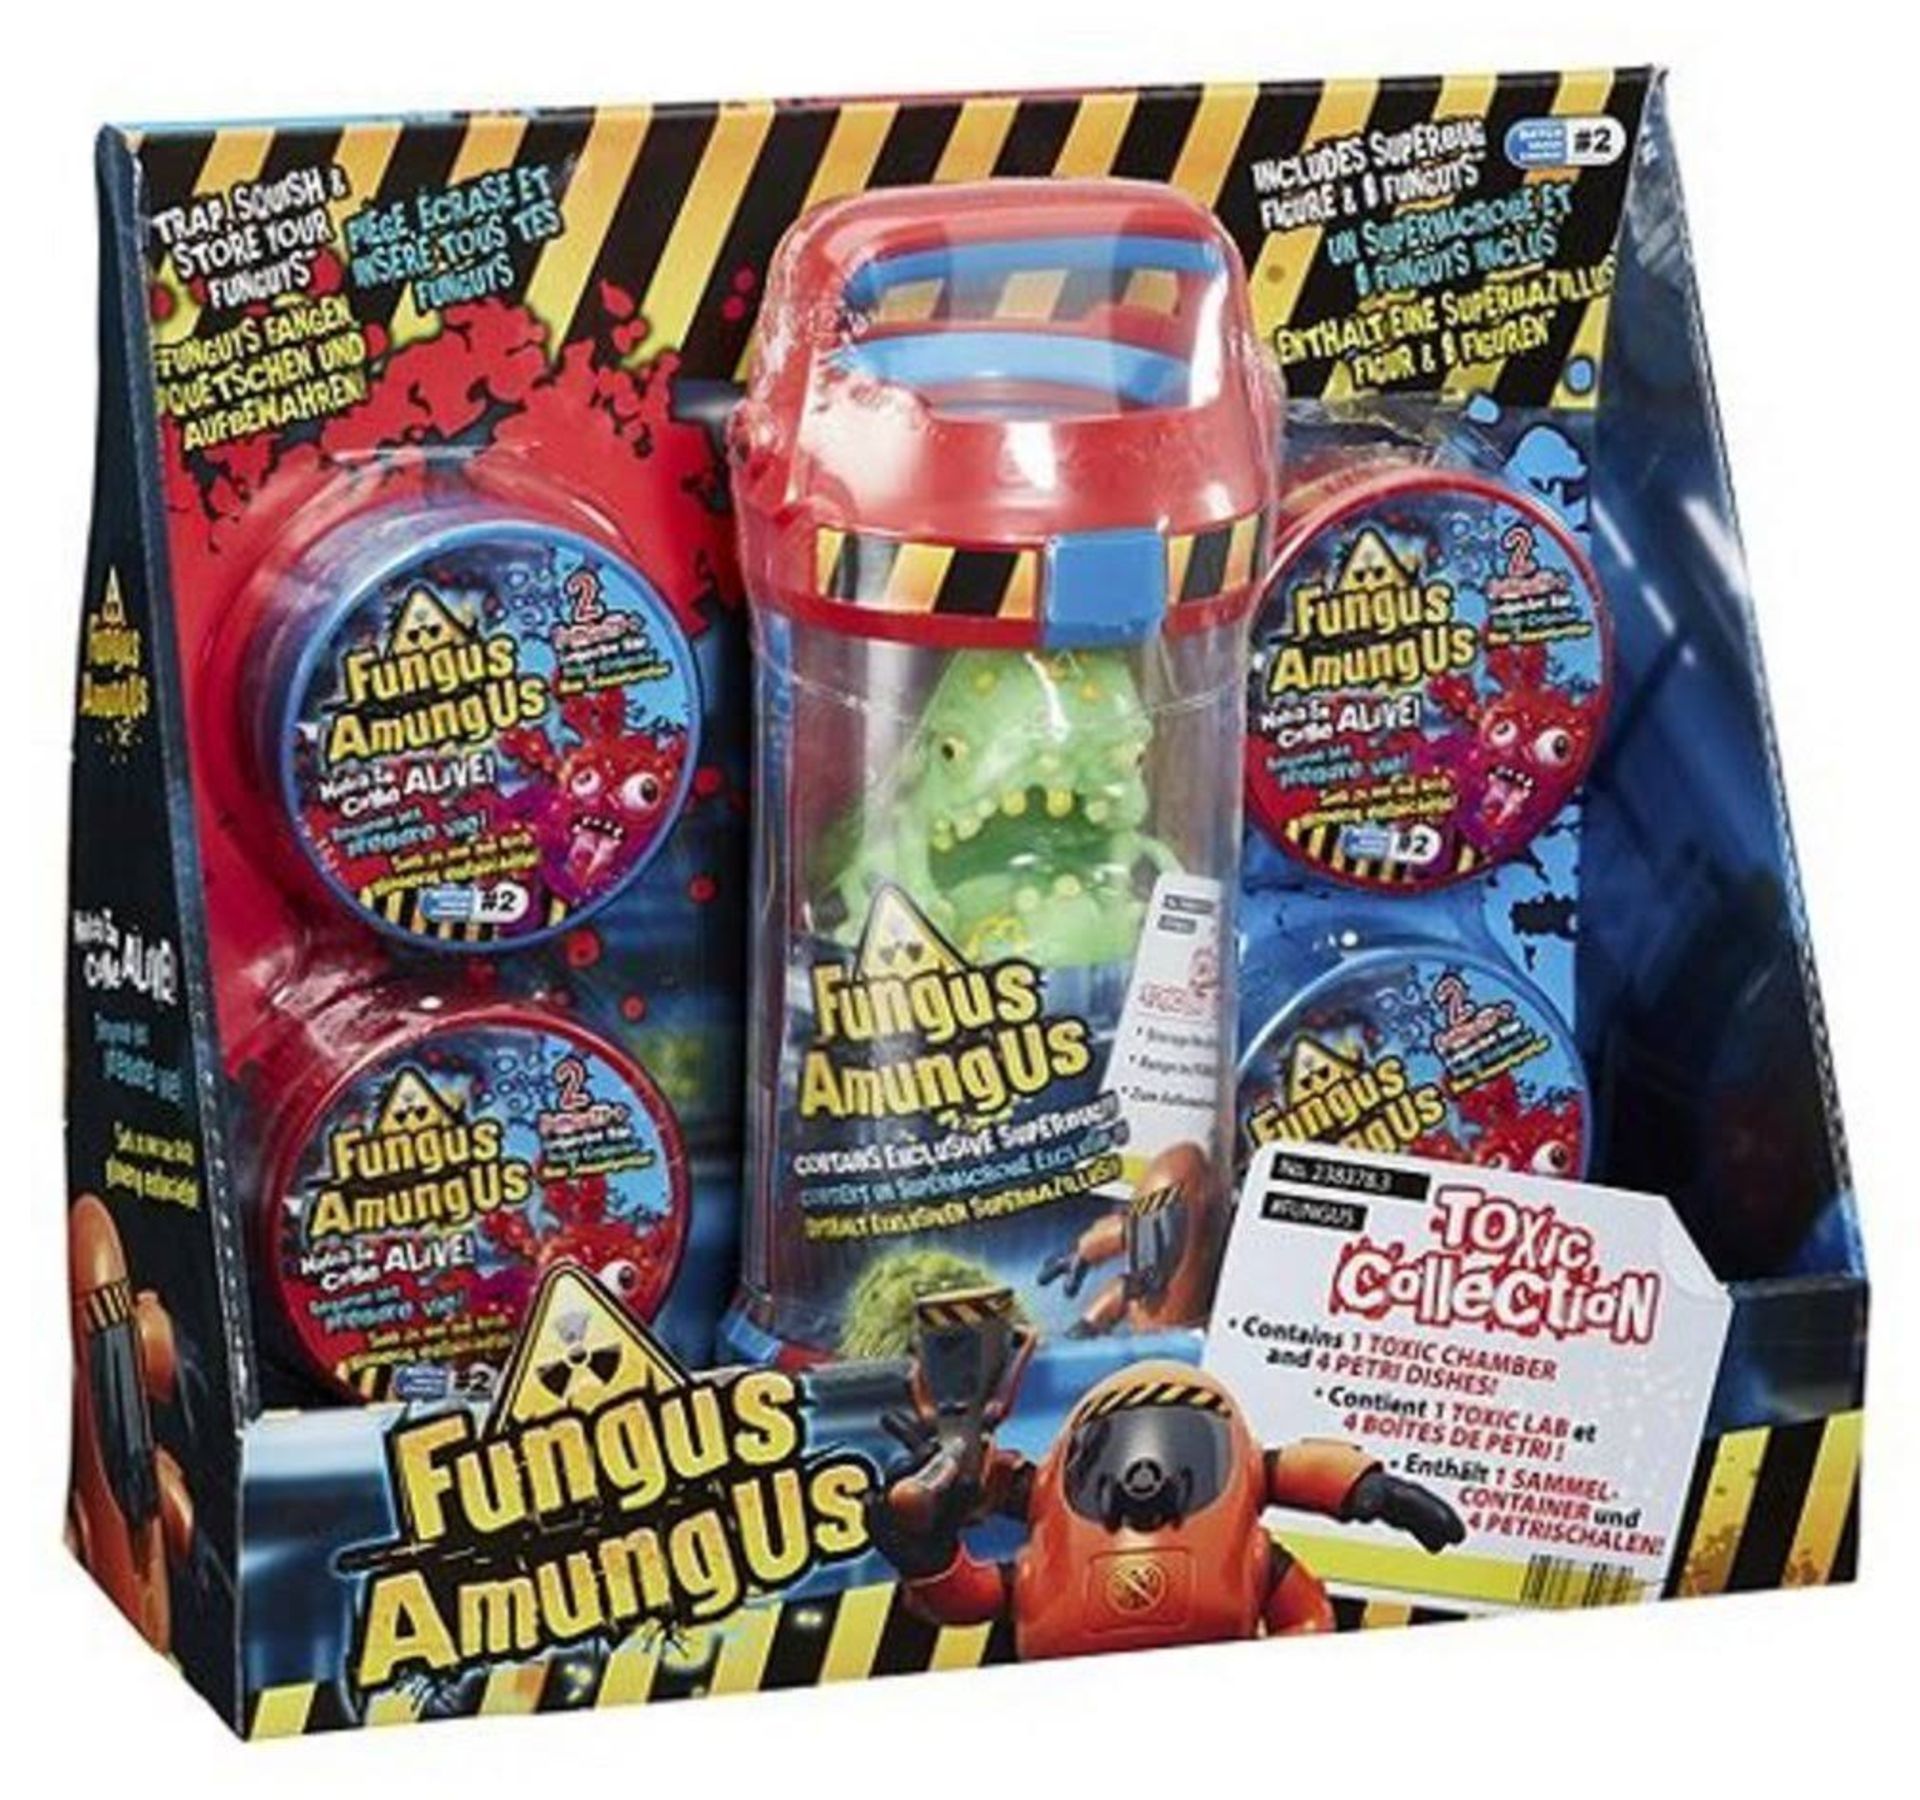 V *TRADE QTY* Brand New Fungus Amungus Toxic Collection ISP Up To £24.99 (Ebay) X 3 YOUR BID PRICE